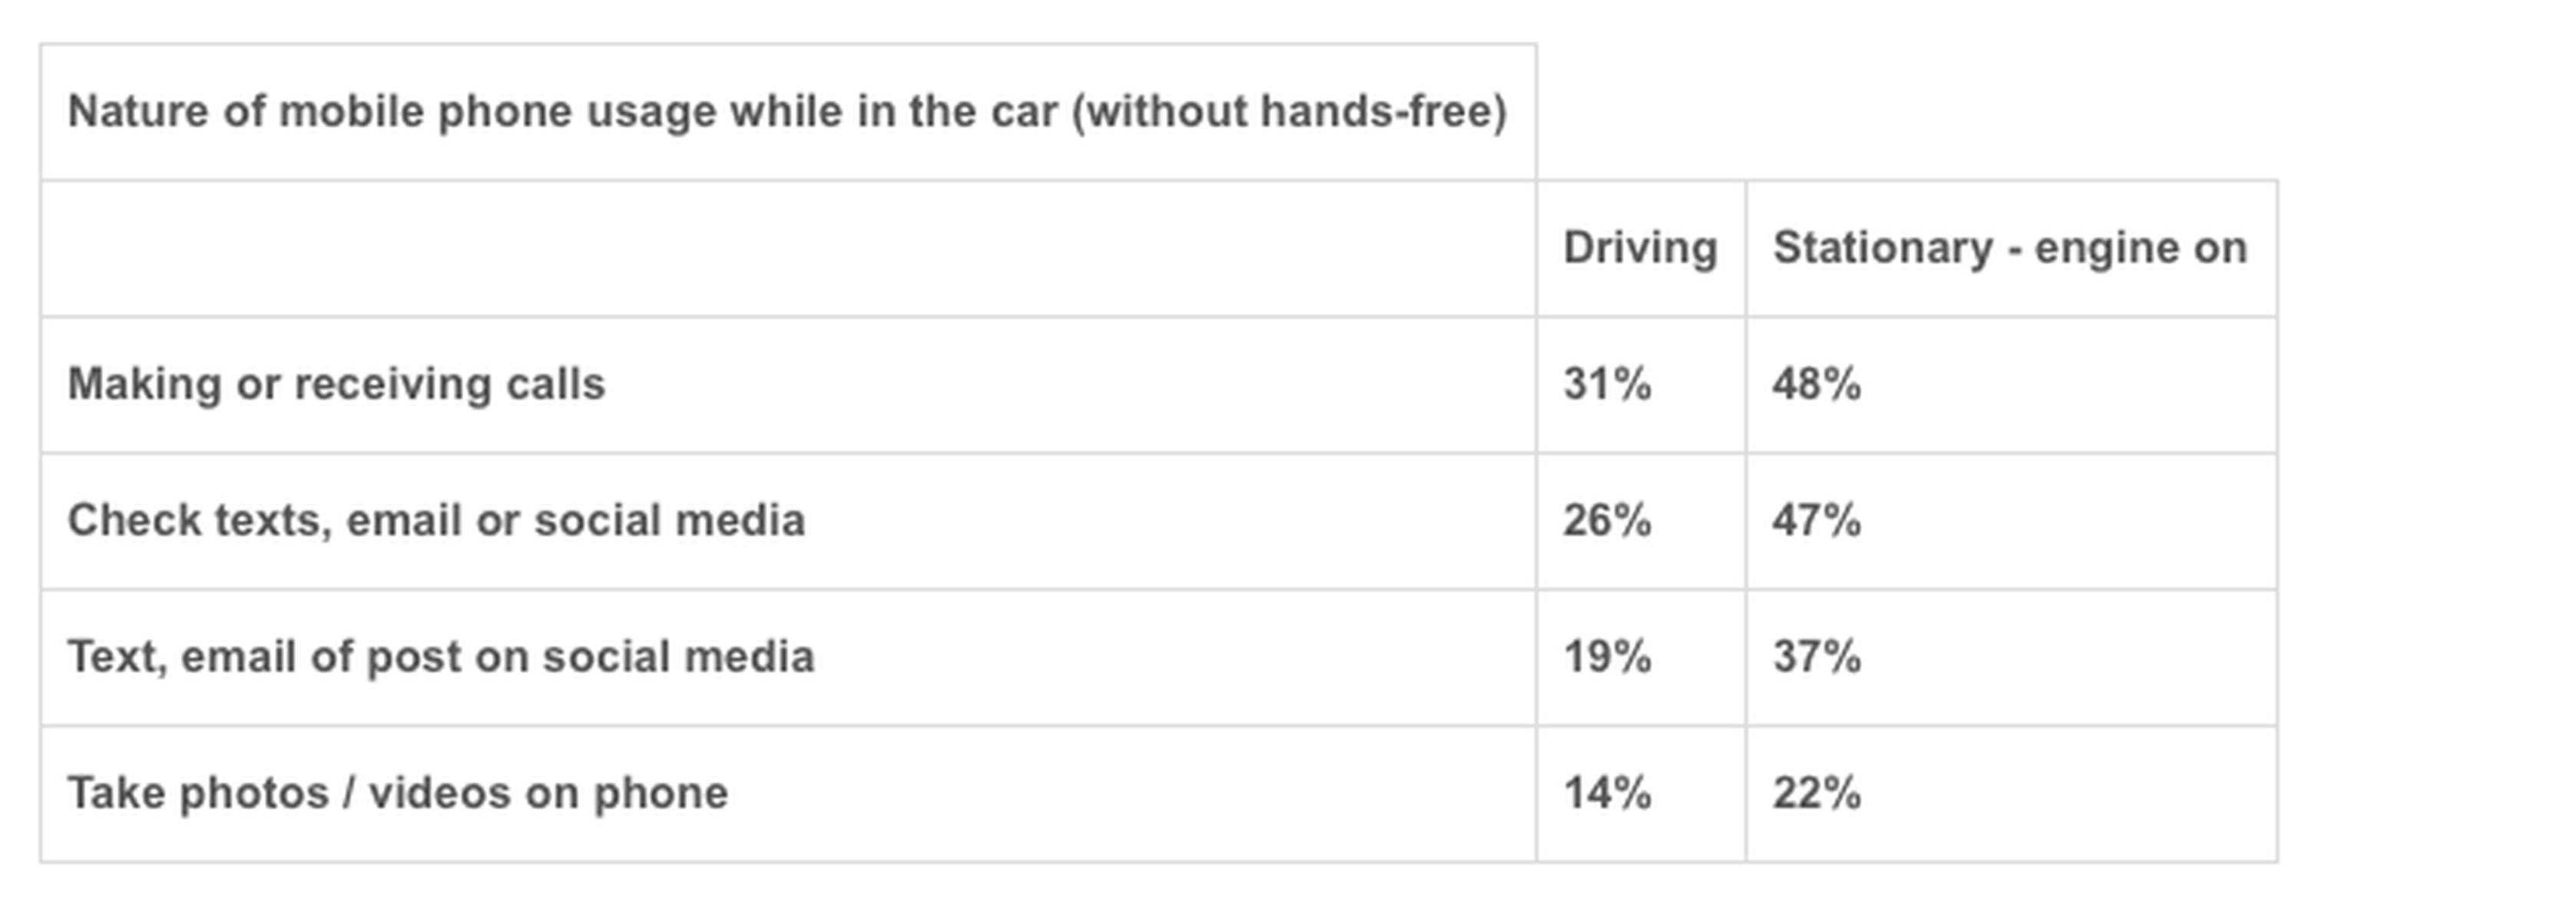 Nature of mobile phone use while driving (without hands-free)